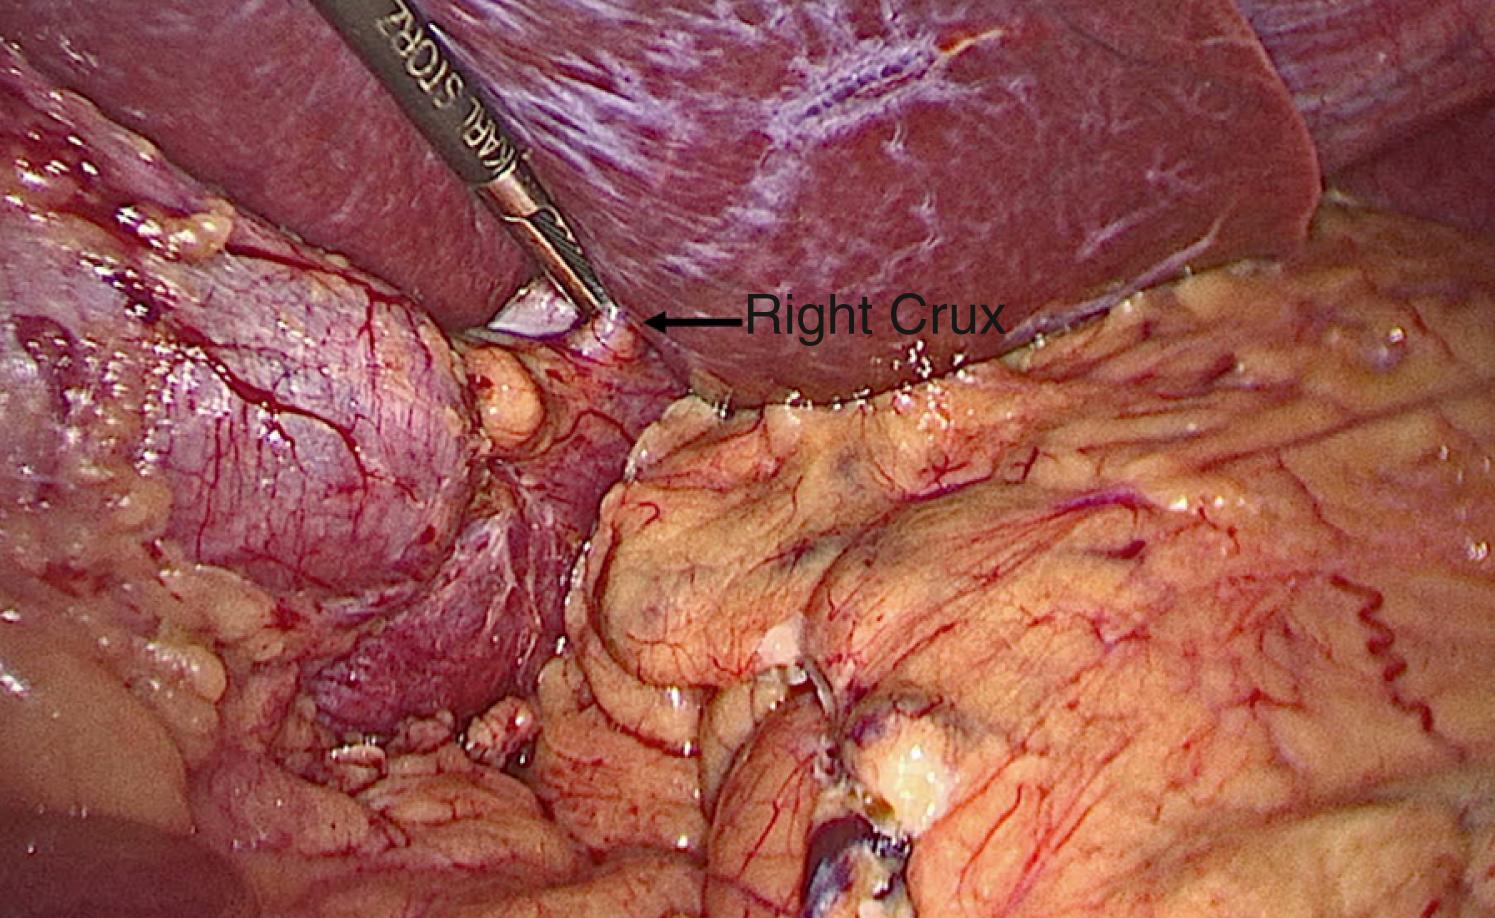 Fig. 25-3, Through a subxiphoid stab incision, a locking grasper slides below the left lobe of the liver to grasp the patient’s right crus and retract the liver.